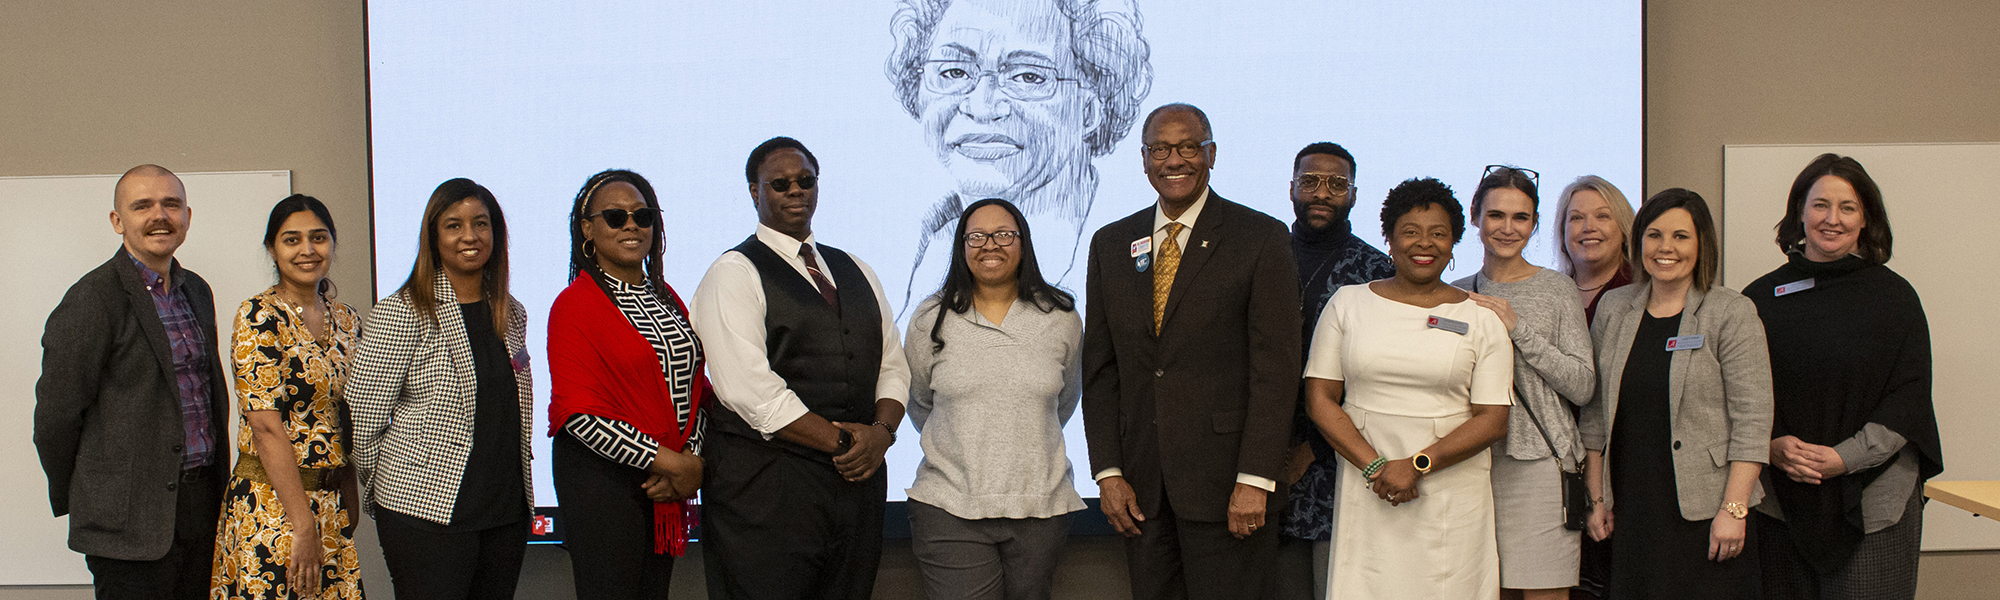 a group of people standing in front of a projection screen with an image of Ethel Hall